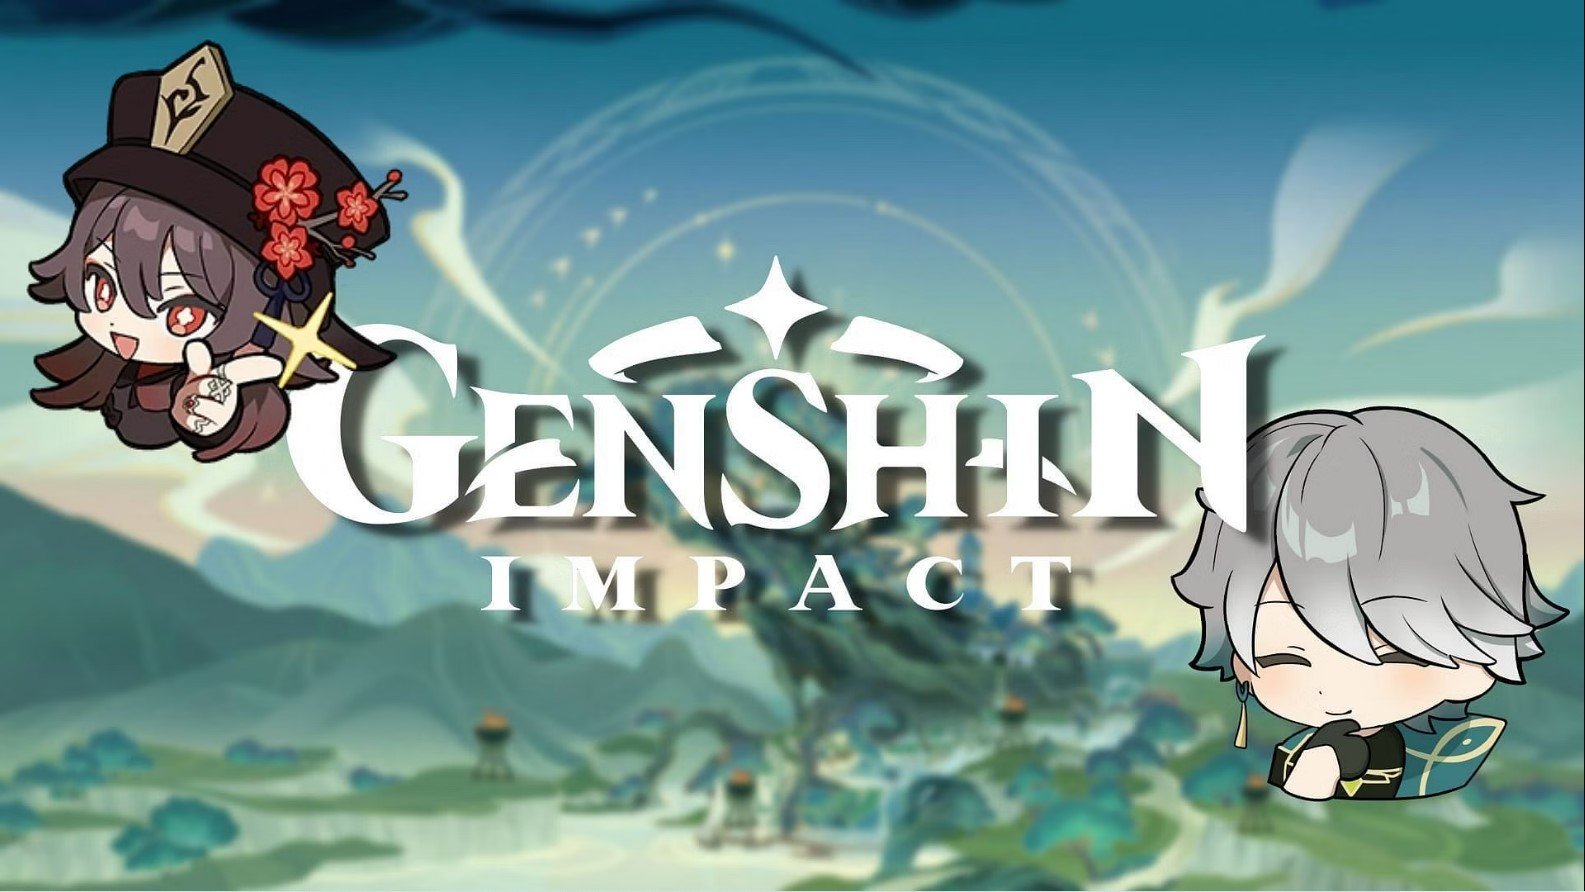  Concise Synchronous Strategy Event Genshin Impact 2023